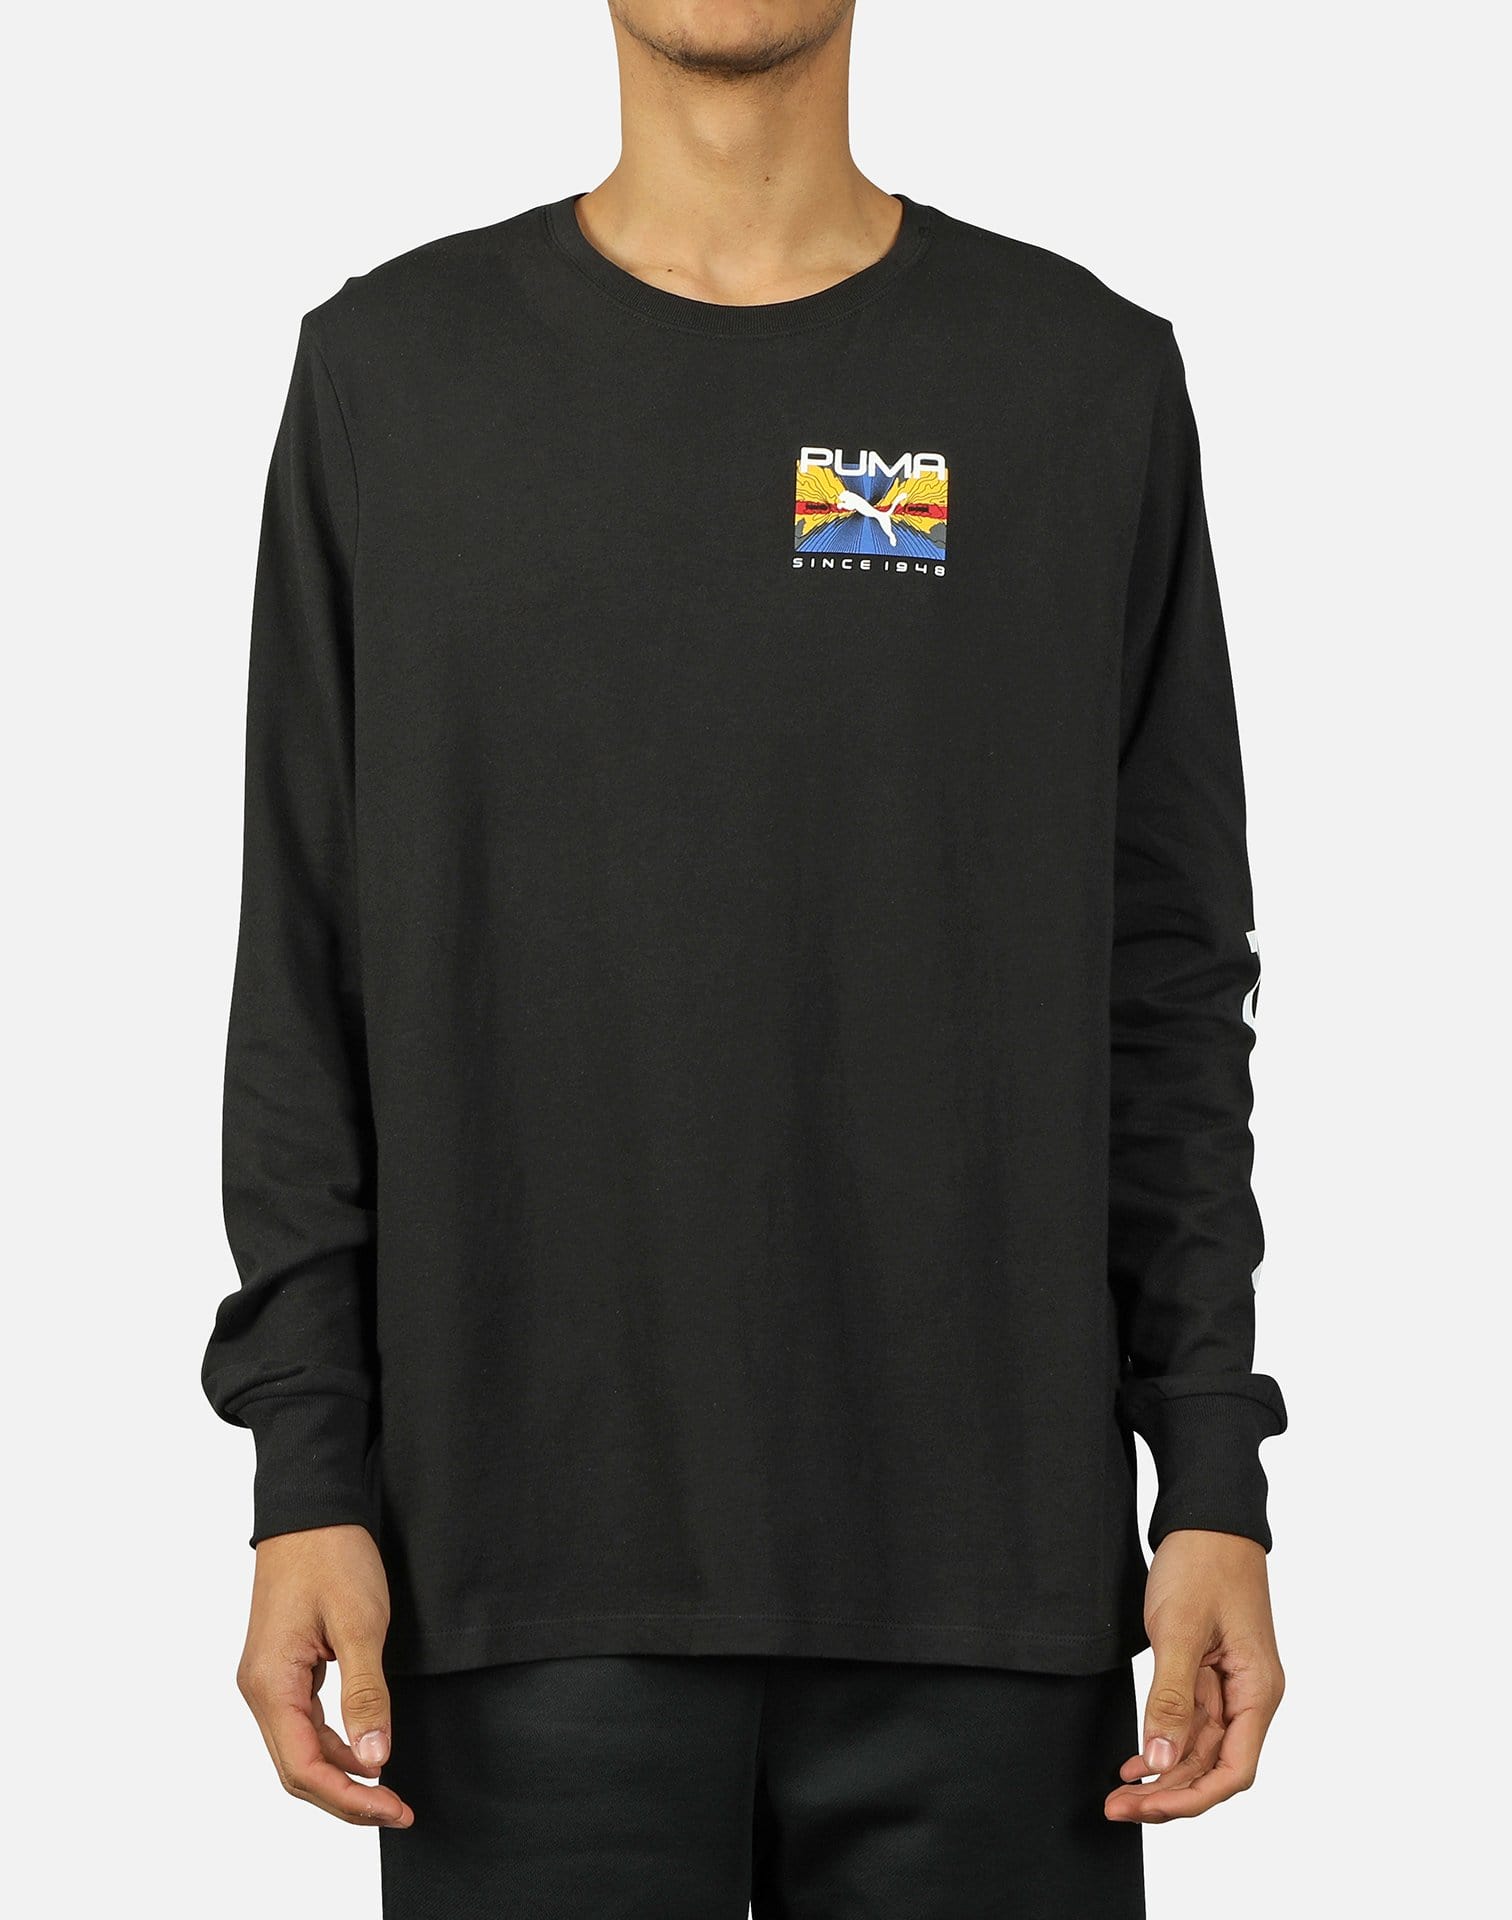 Rs X Puzzle Long Sleeve Tee Dtlr